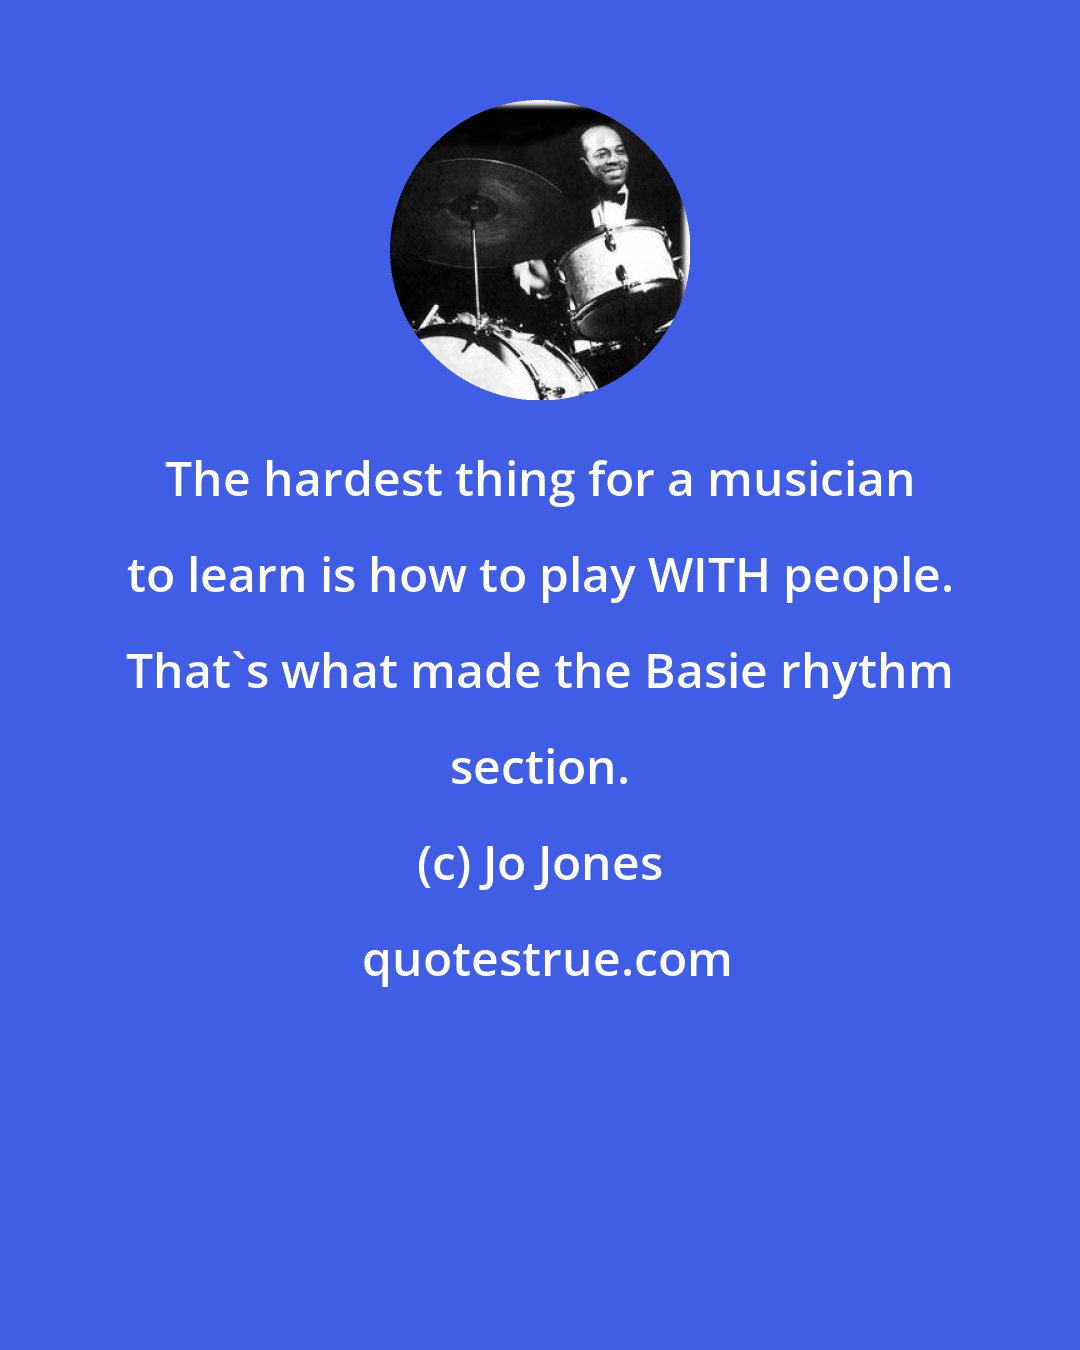 Jo Jones: The hardest thing for a musician to learn is how to play WITH people. That's what made the Basie rhythm section.